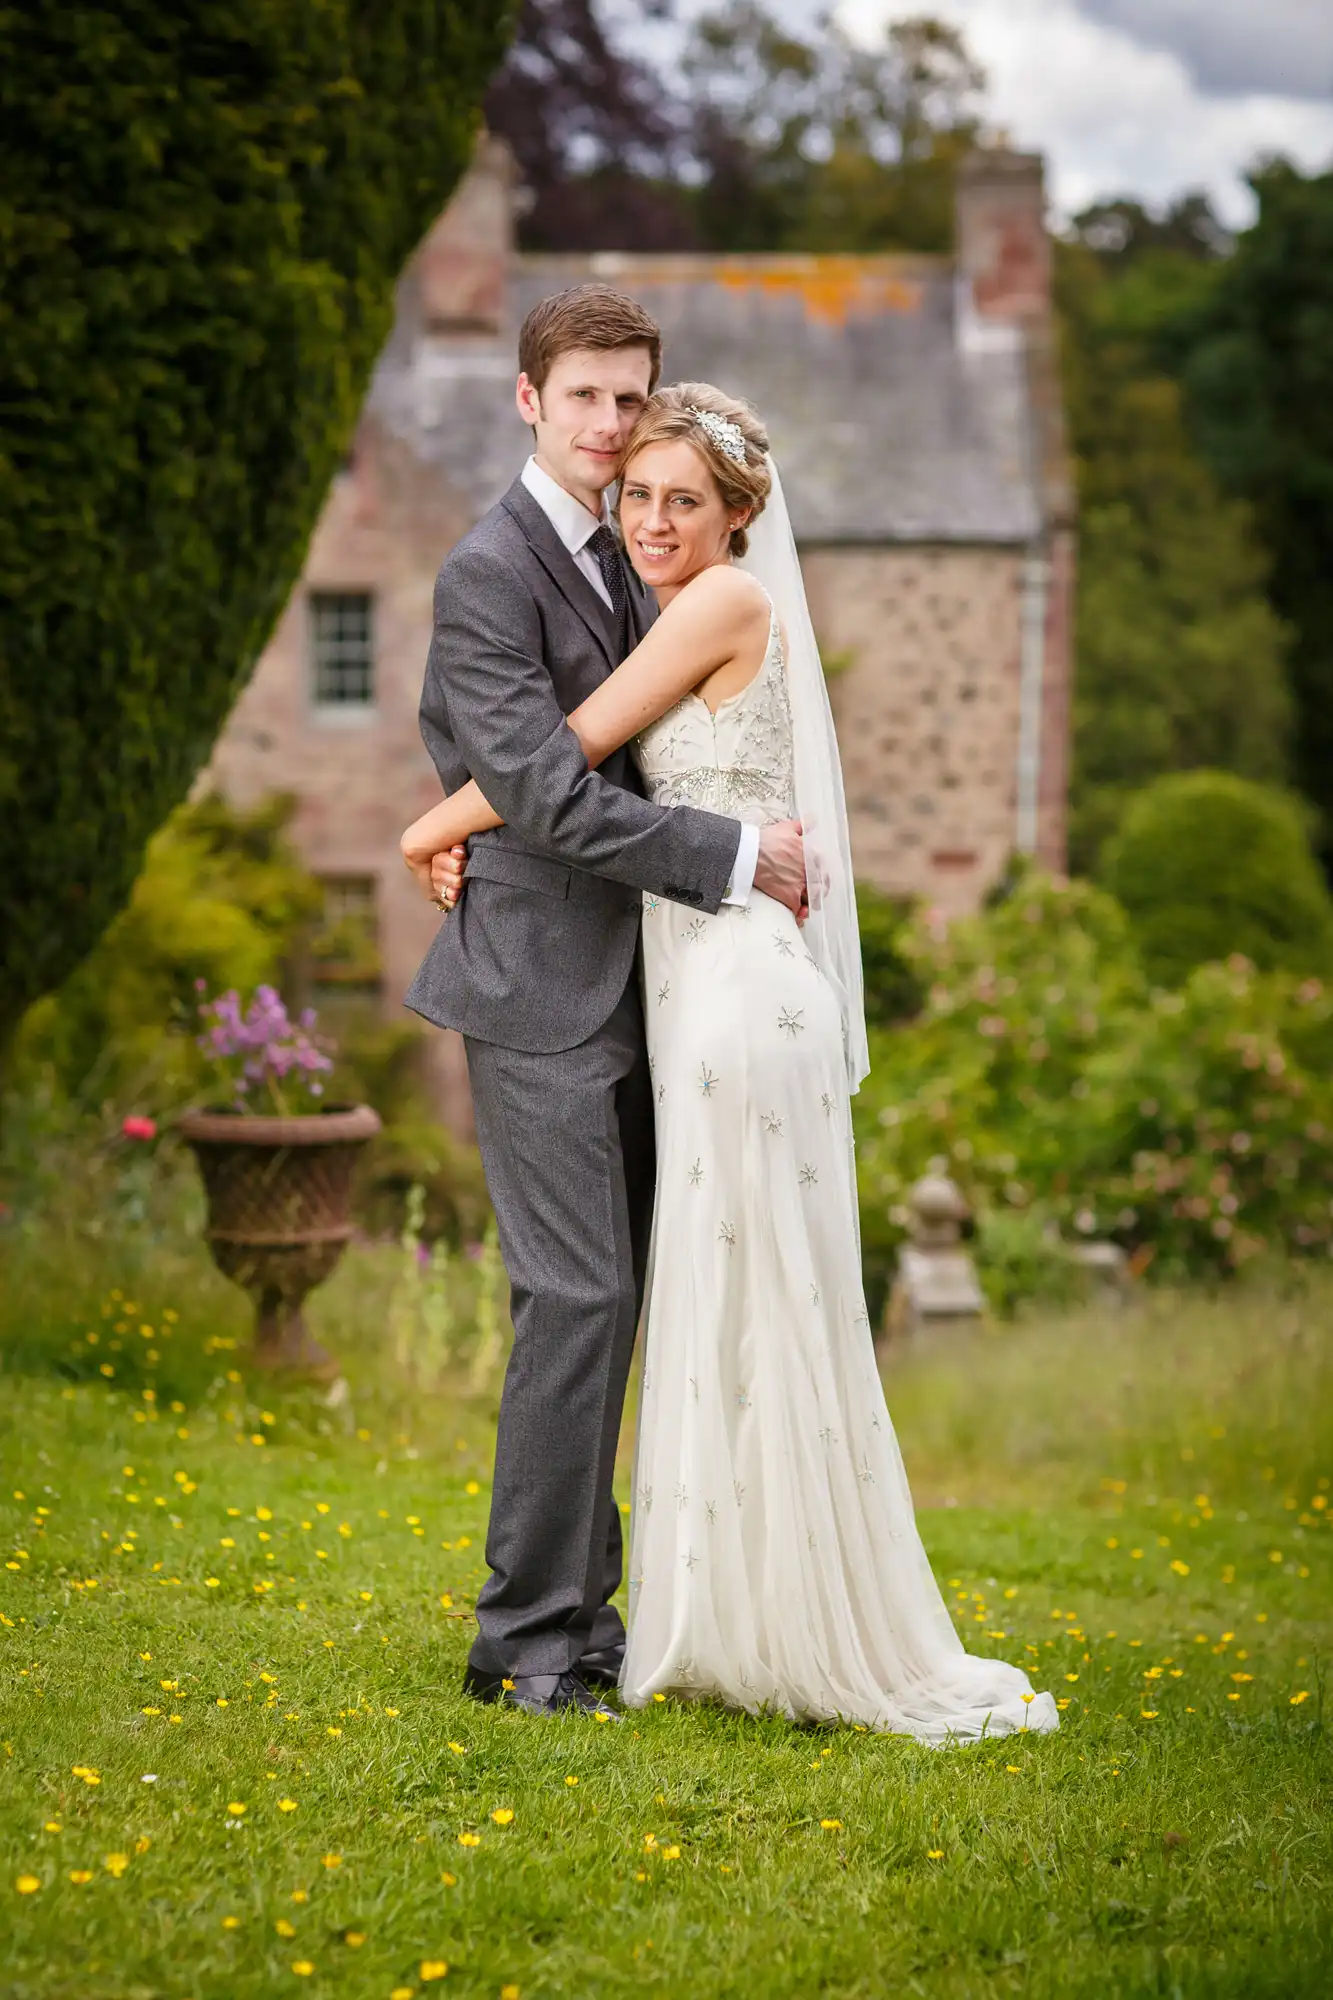 A bride in a white gown and a groom in a gray suit embrace in a garden with a historic brick building in the background.